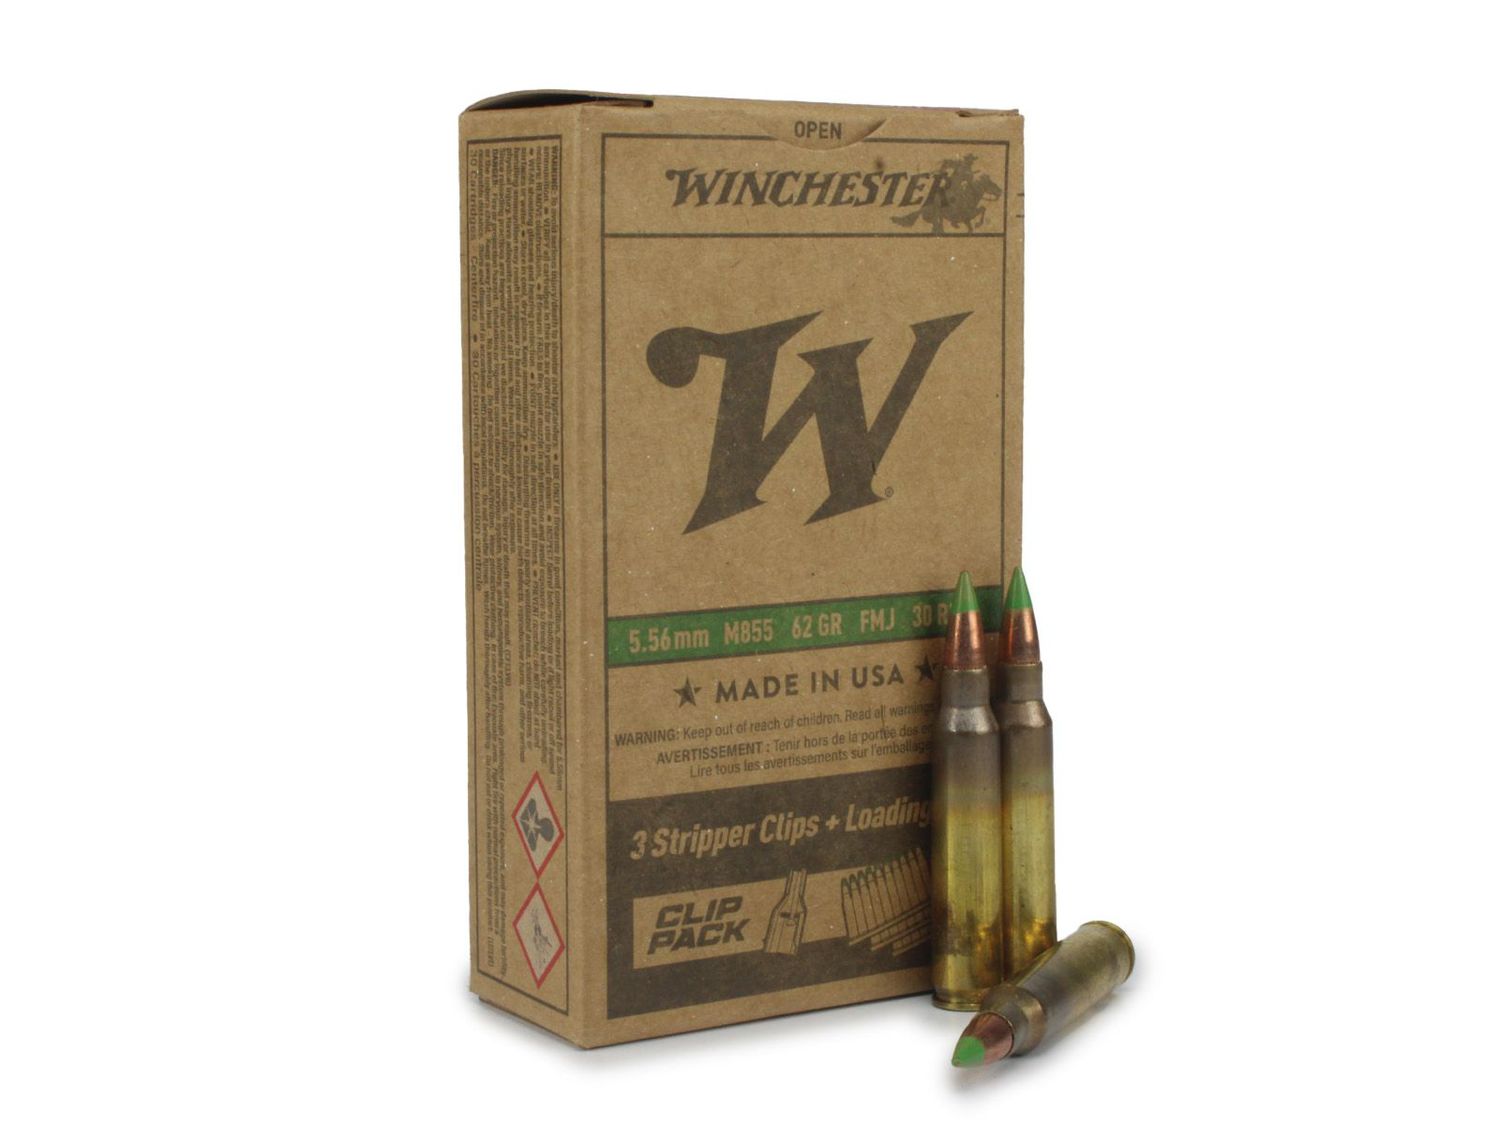 WInchester Clip Pack 5.56 M855